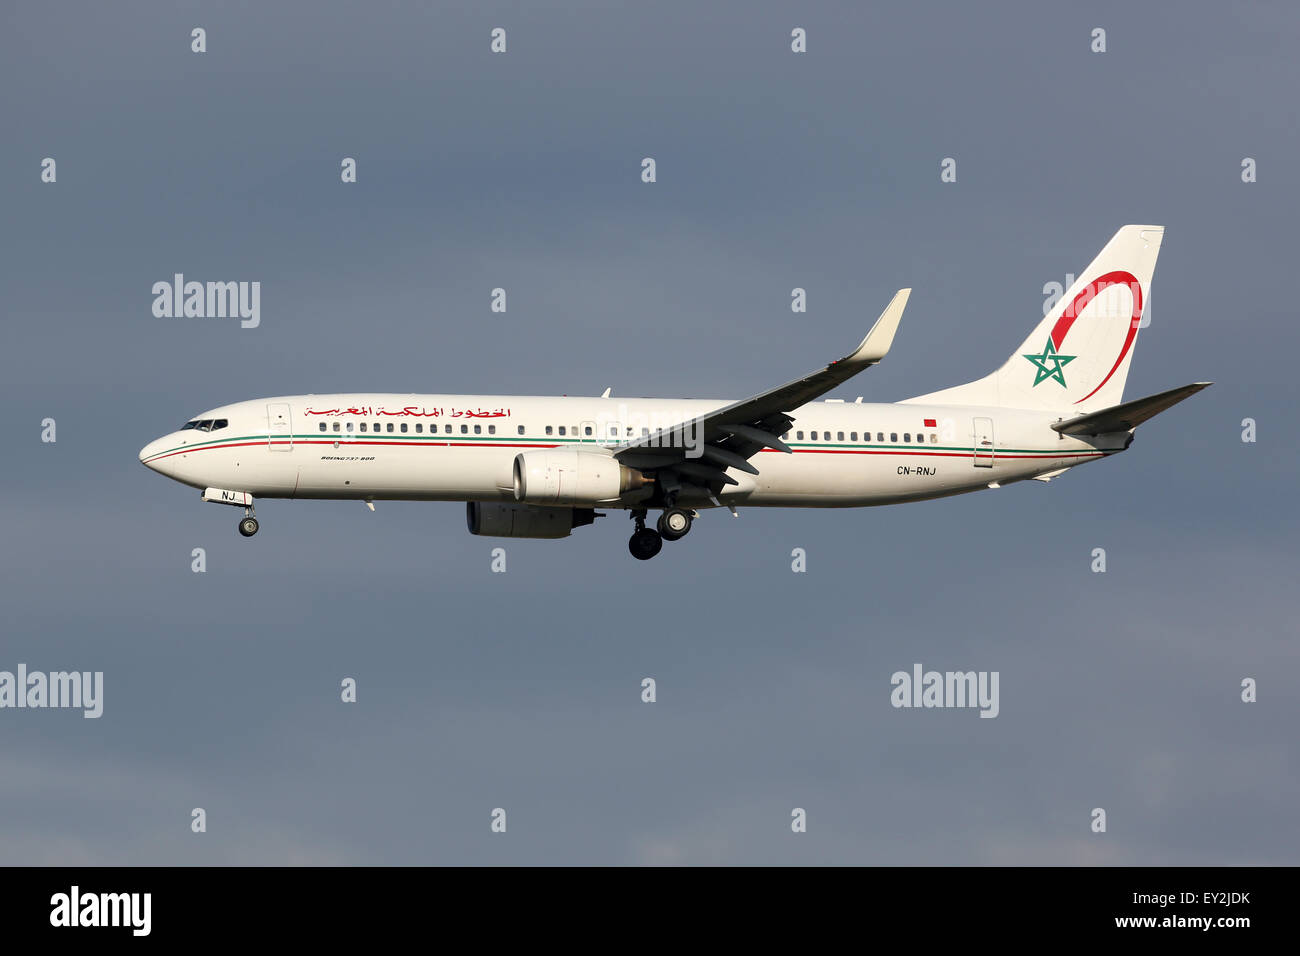 Madrid, Spain - March 3, 2015: A Royal Air Maroc Boeing 737-800 with the registration CN-RNJ approaches Madrid Airport (MAD) in Stock Photo